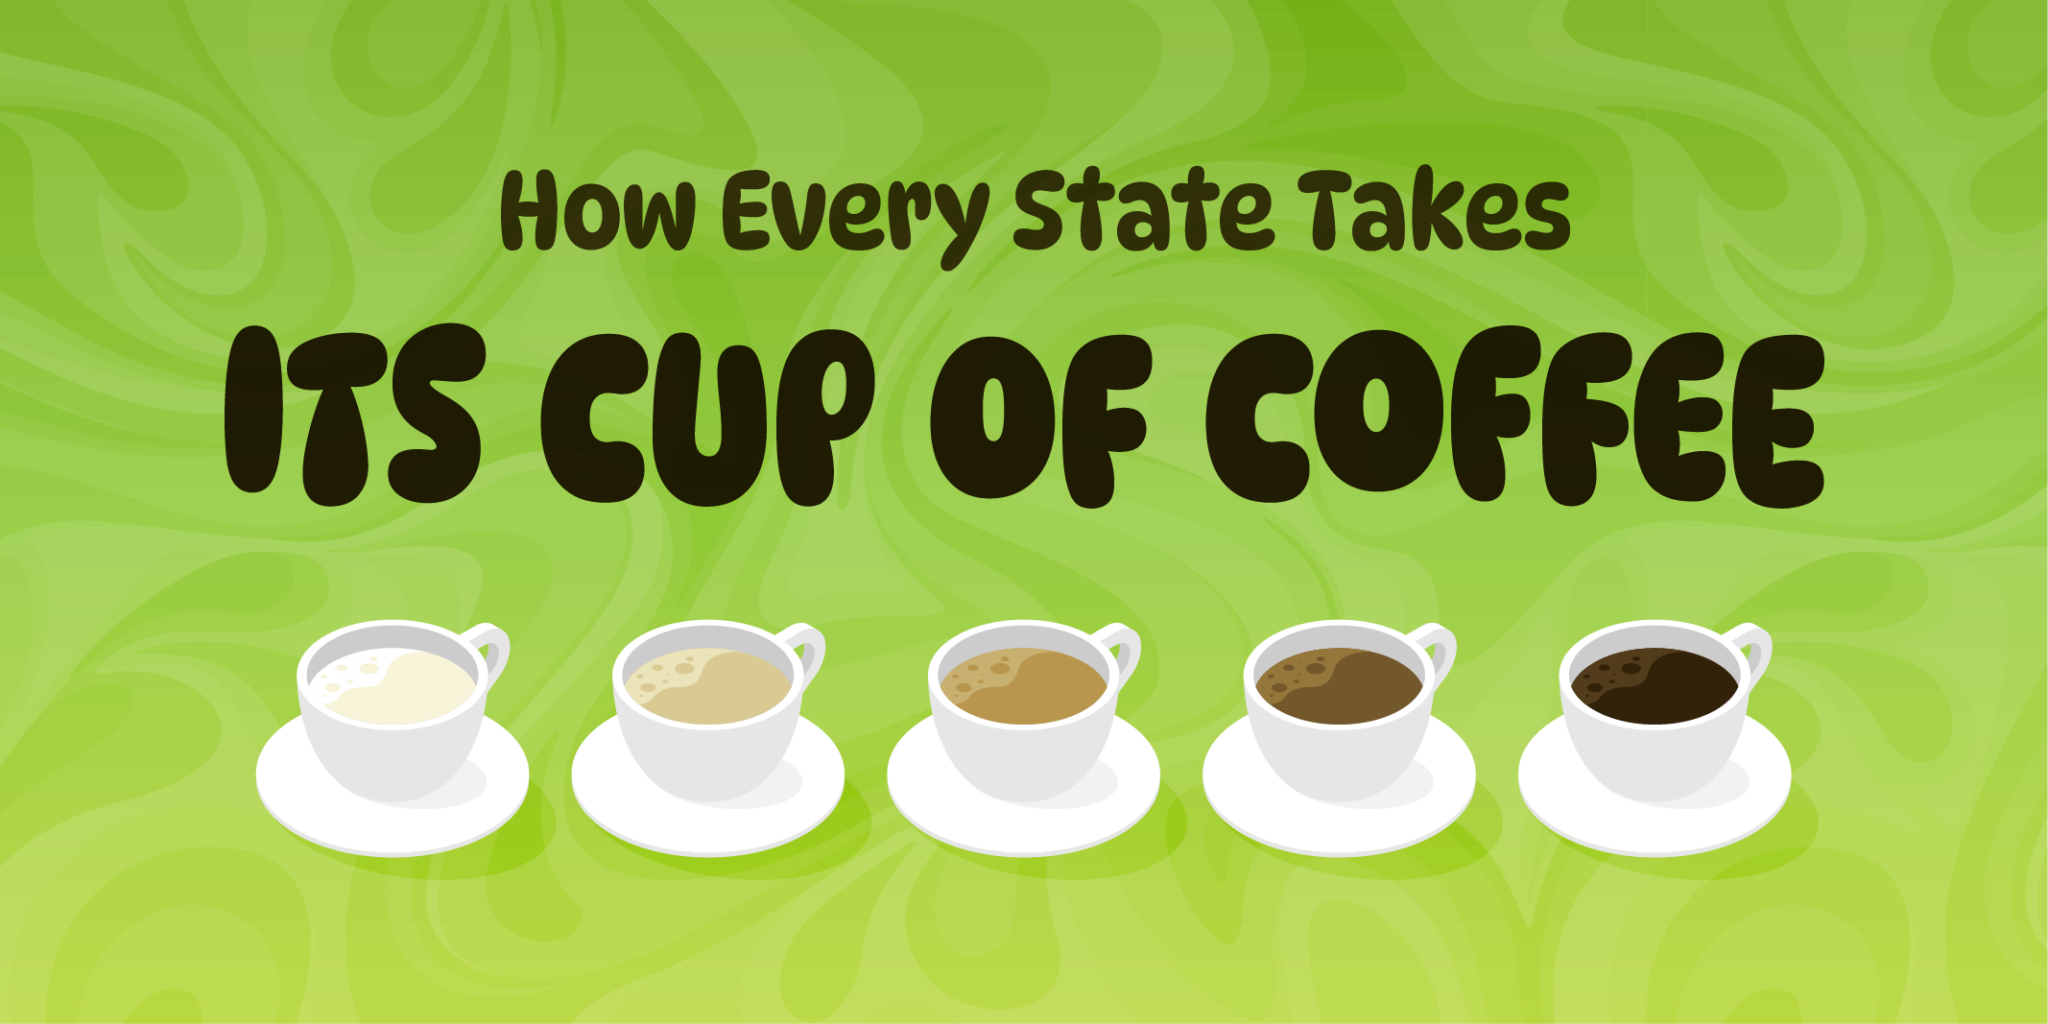 A header image for a blog about each U.S. state’s coffee preferences